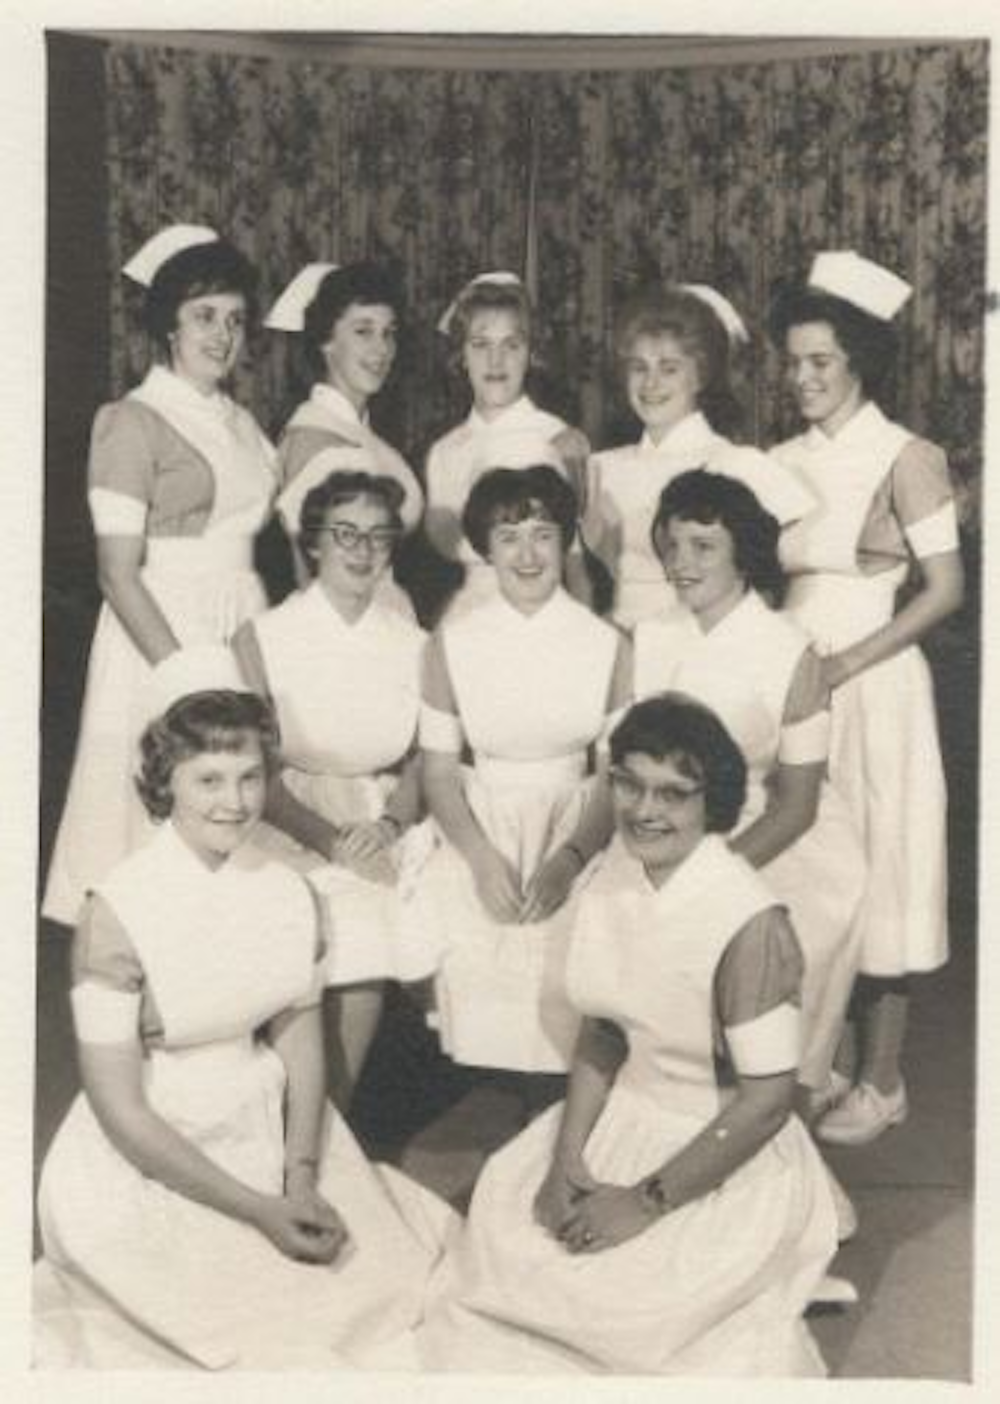 Nursing school, Anna back row second from right, Linda in the center and Barb in front on right